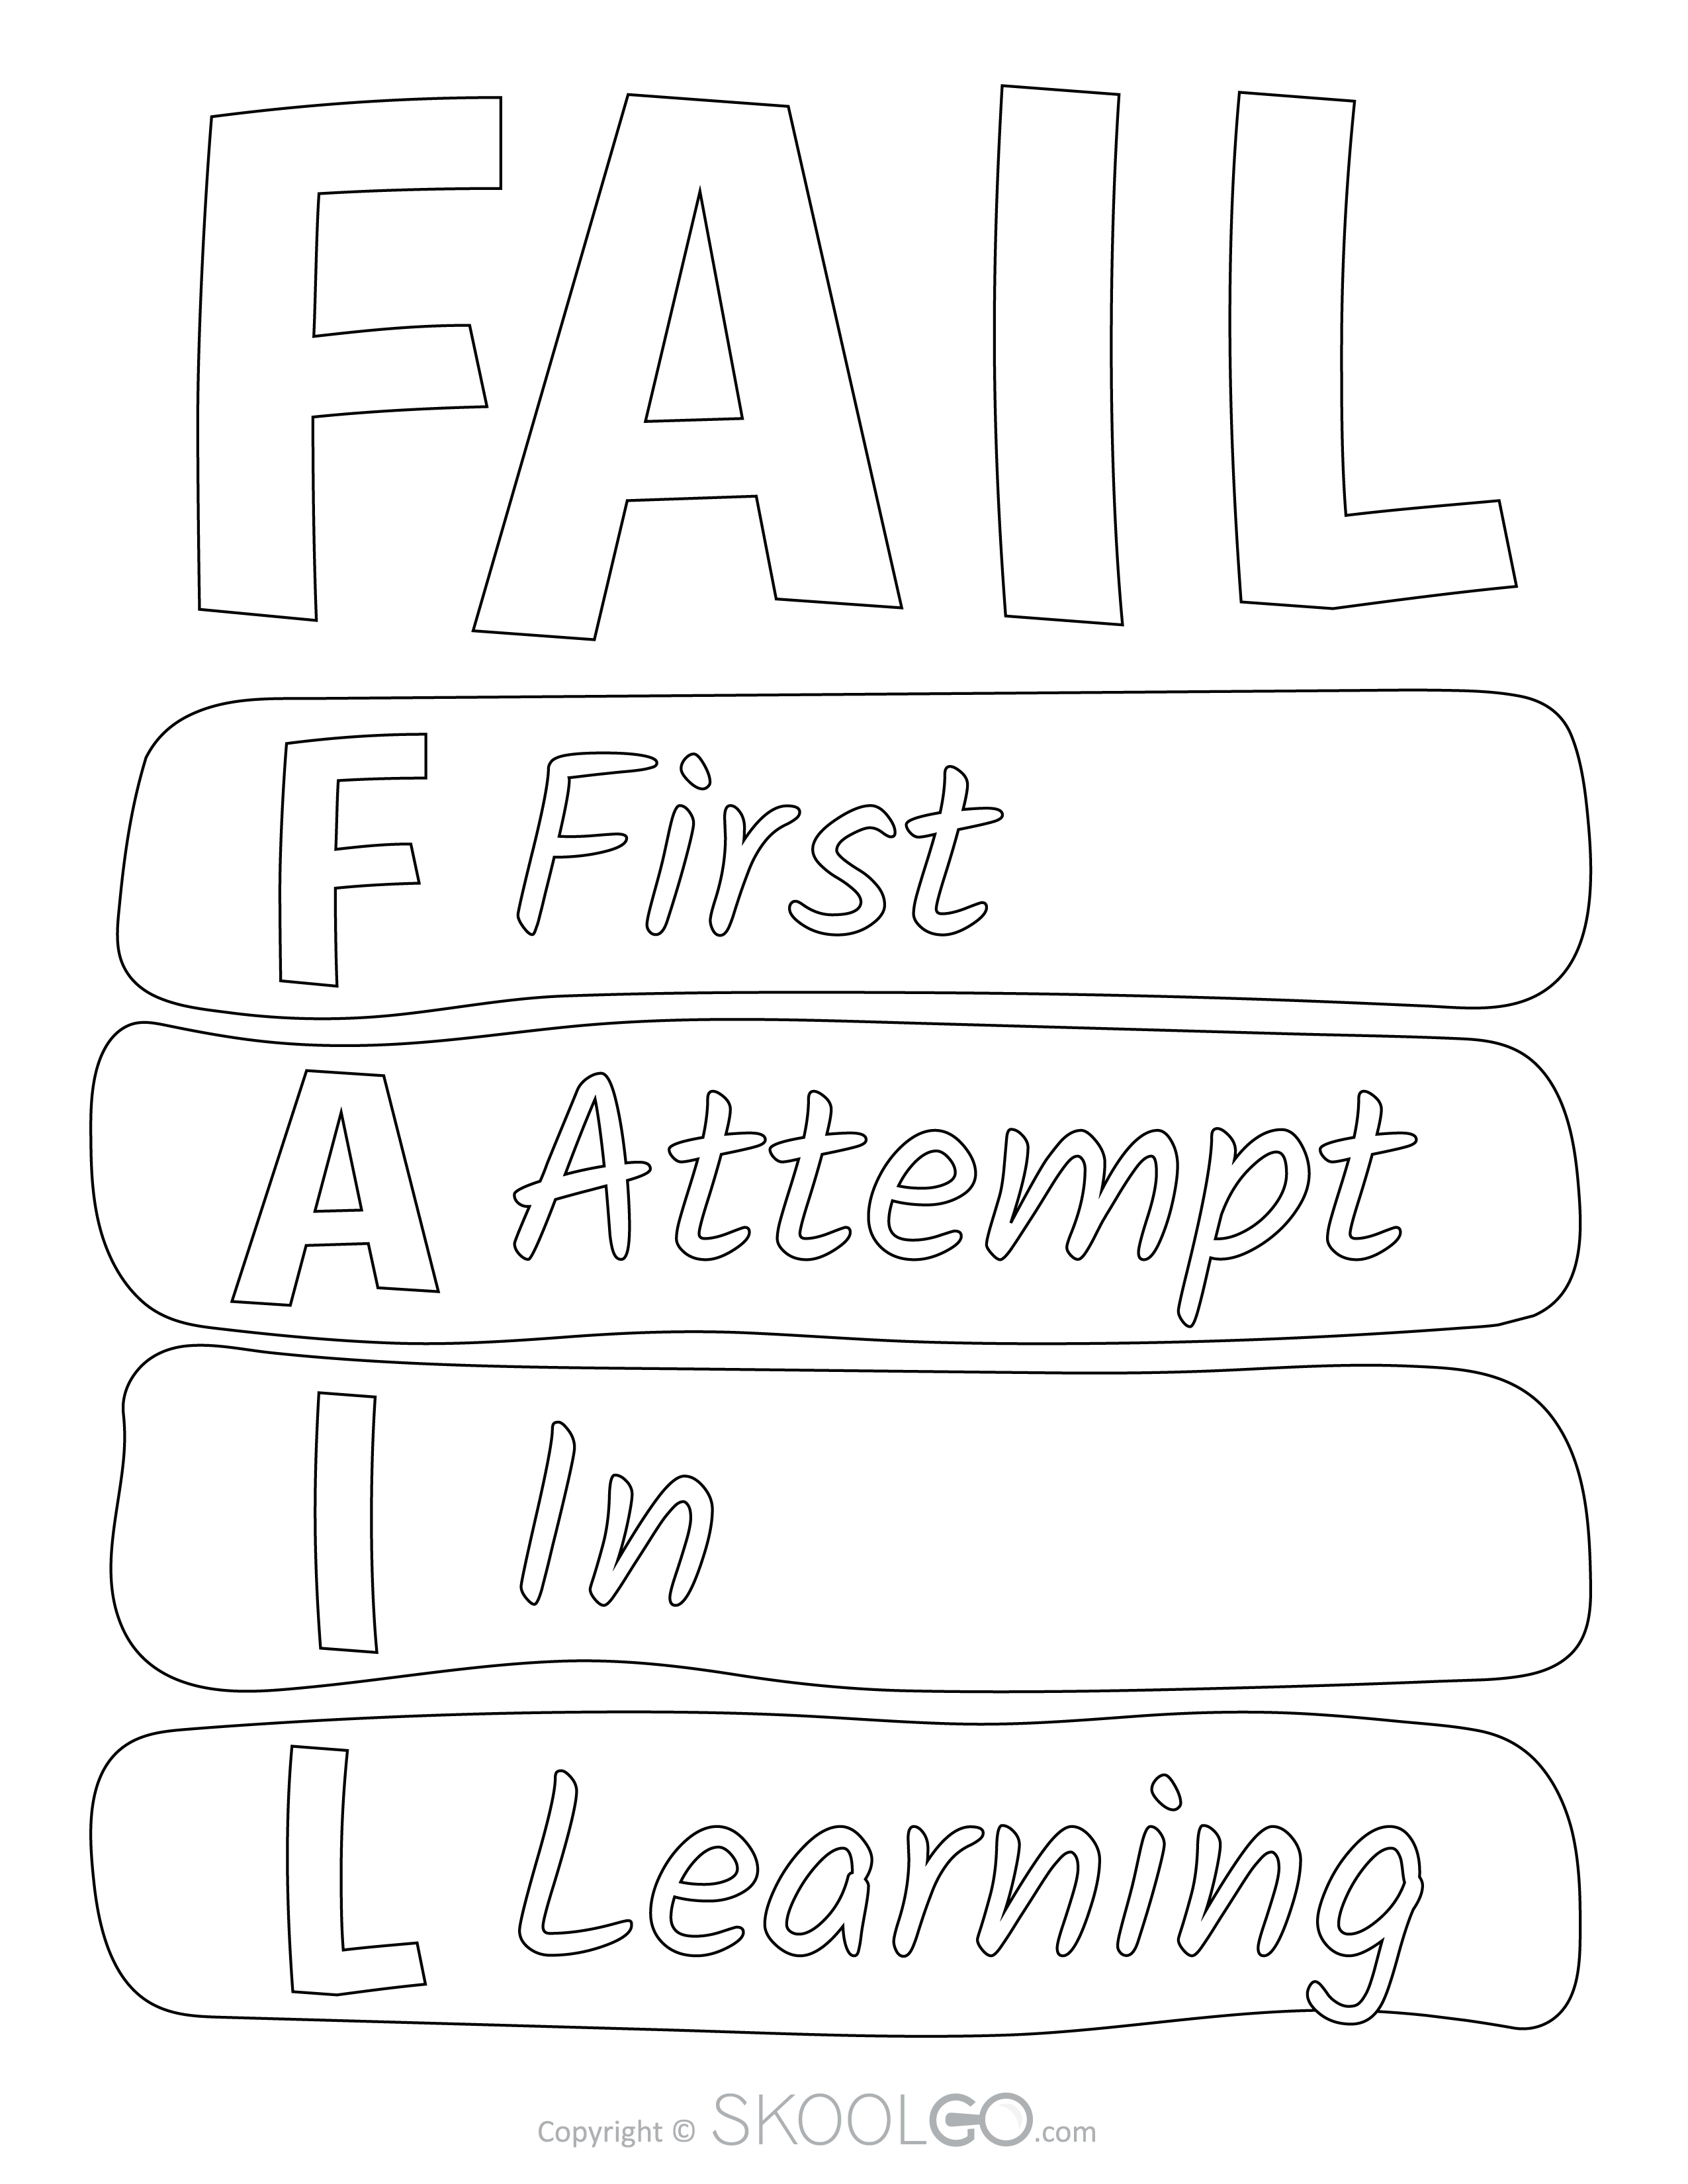 Fail First Attempt In Learning - Free Classroom Poster Coloring Version